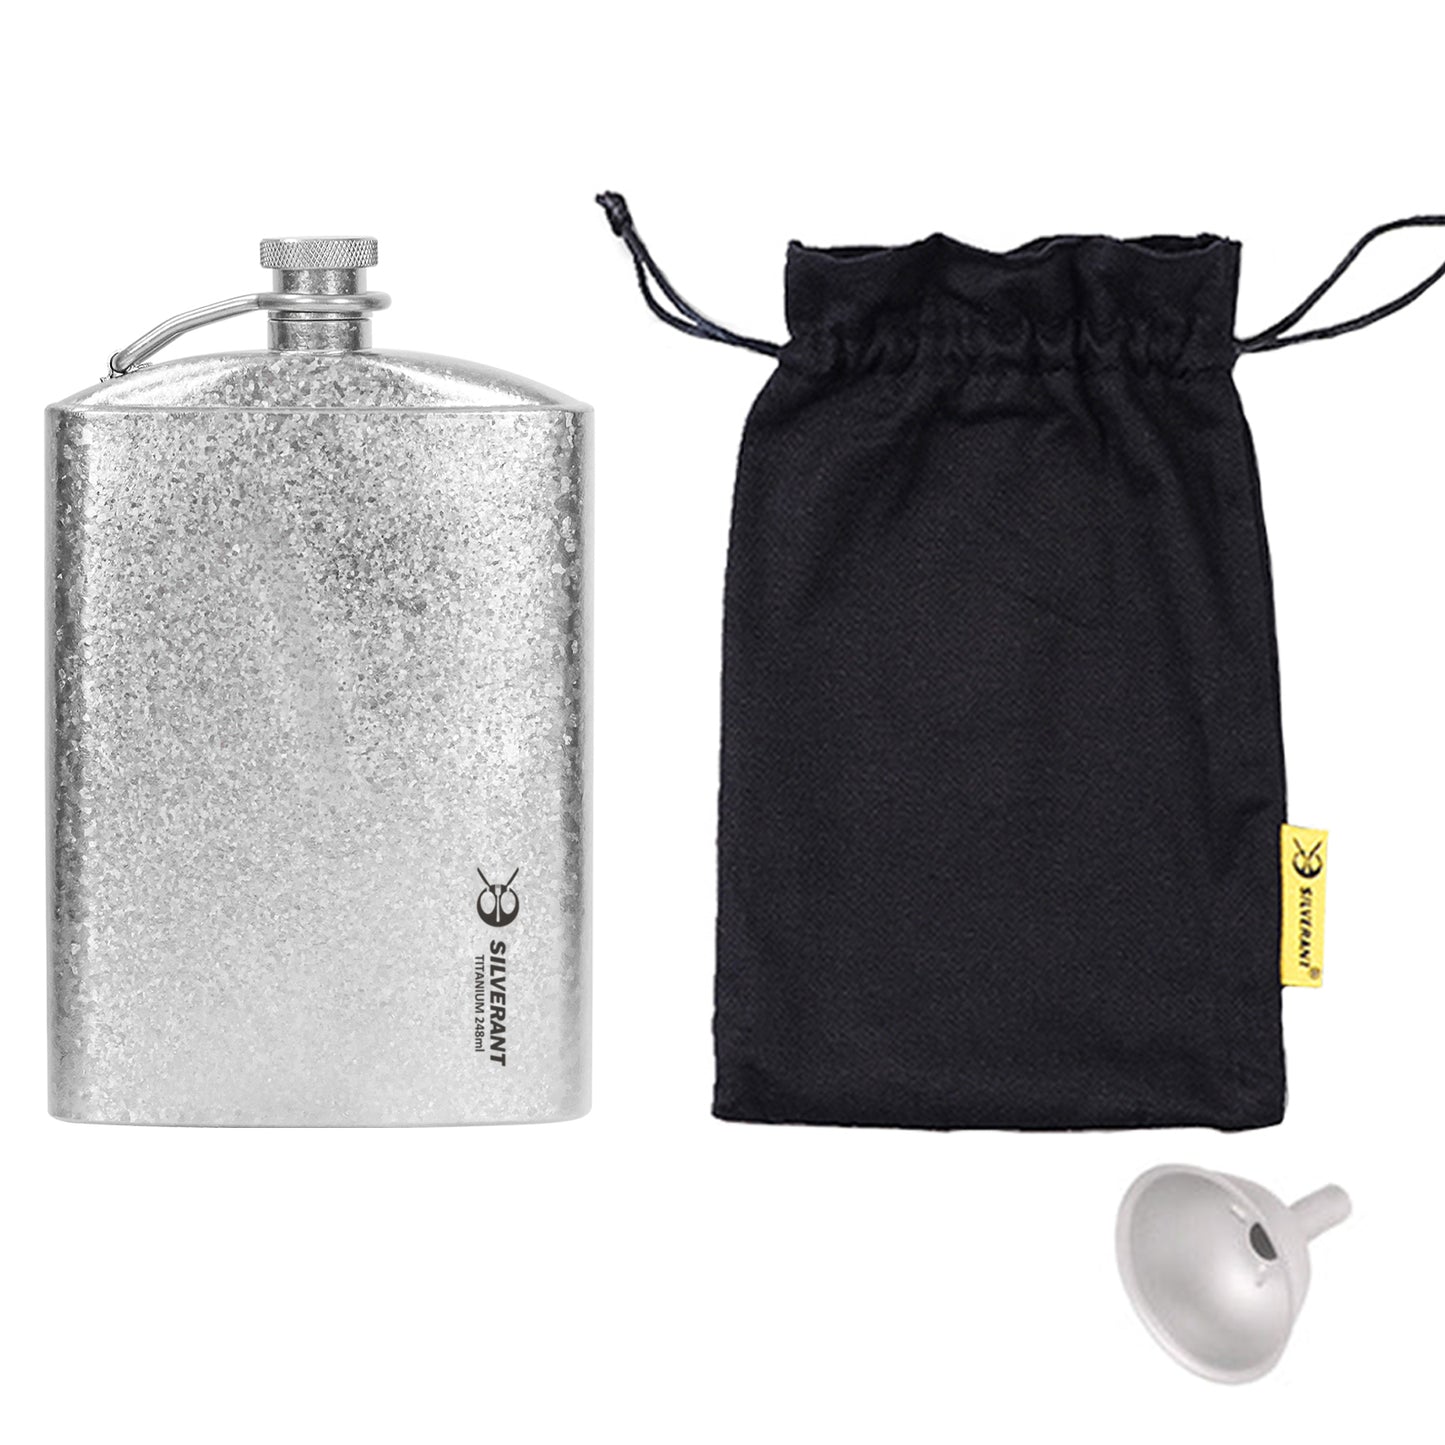 
                  
                    SilverAnt Titanium Hip Flask and Funnel 248ml/8.73 fl oz with crystallized finish - the package
                  
                